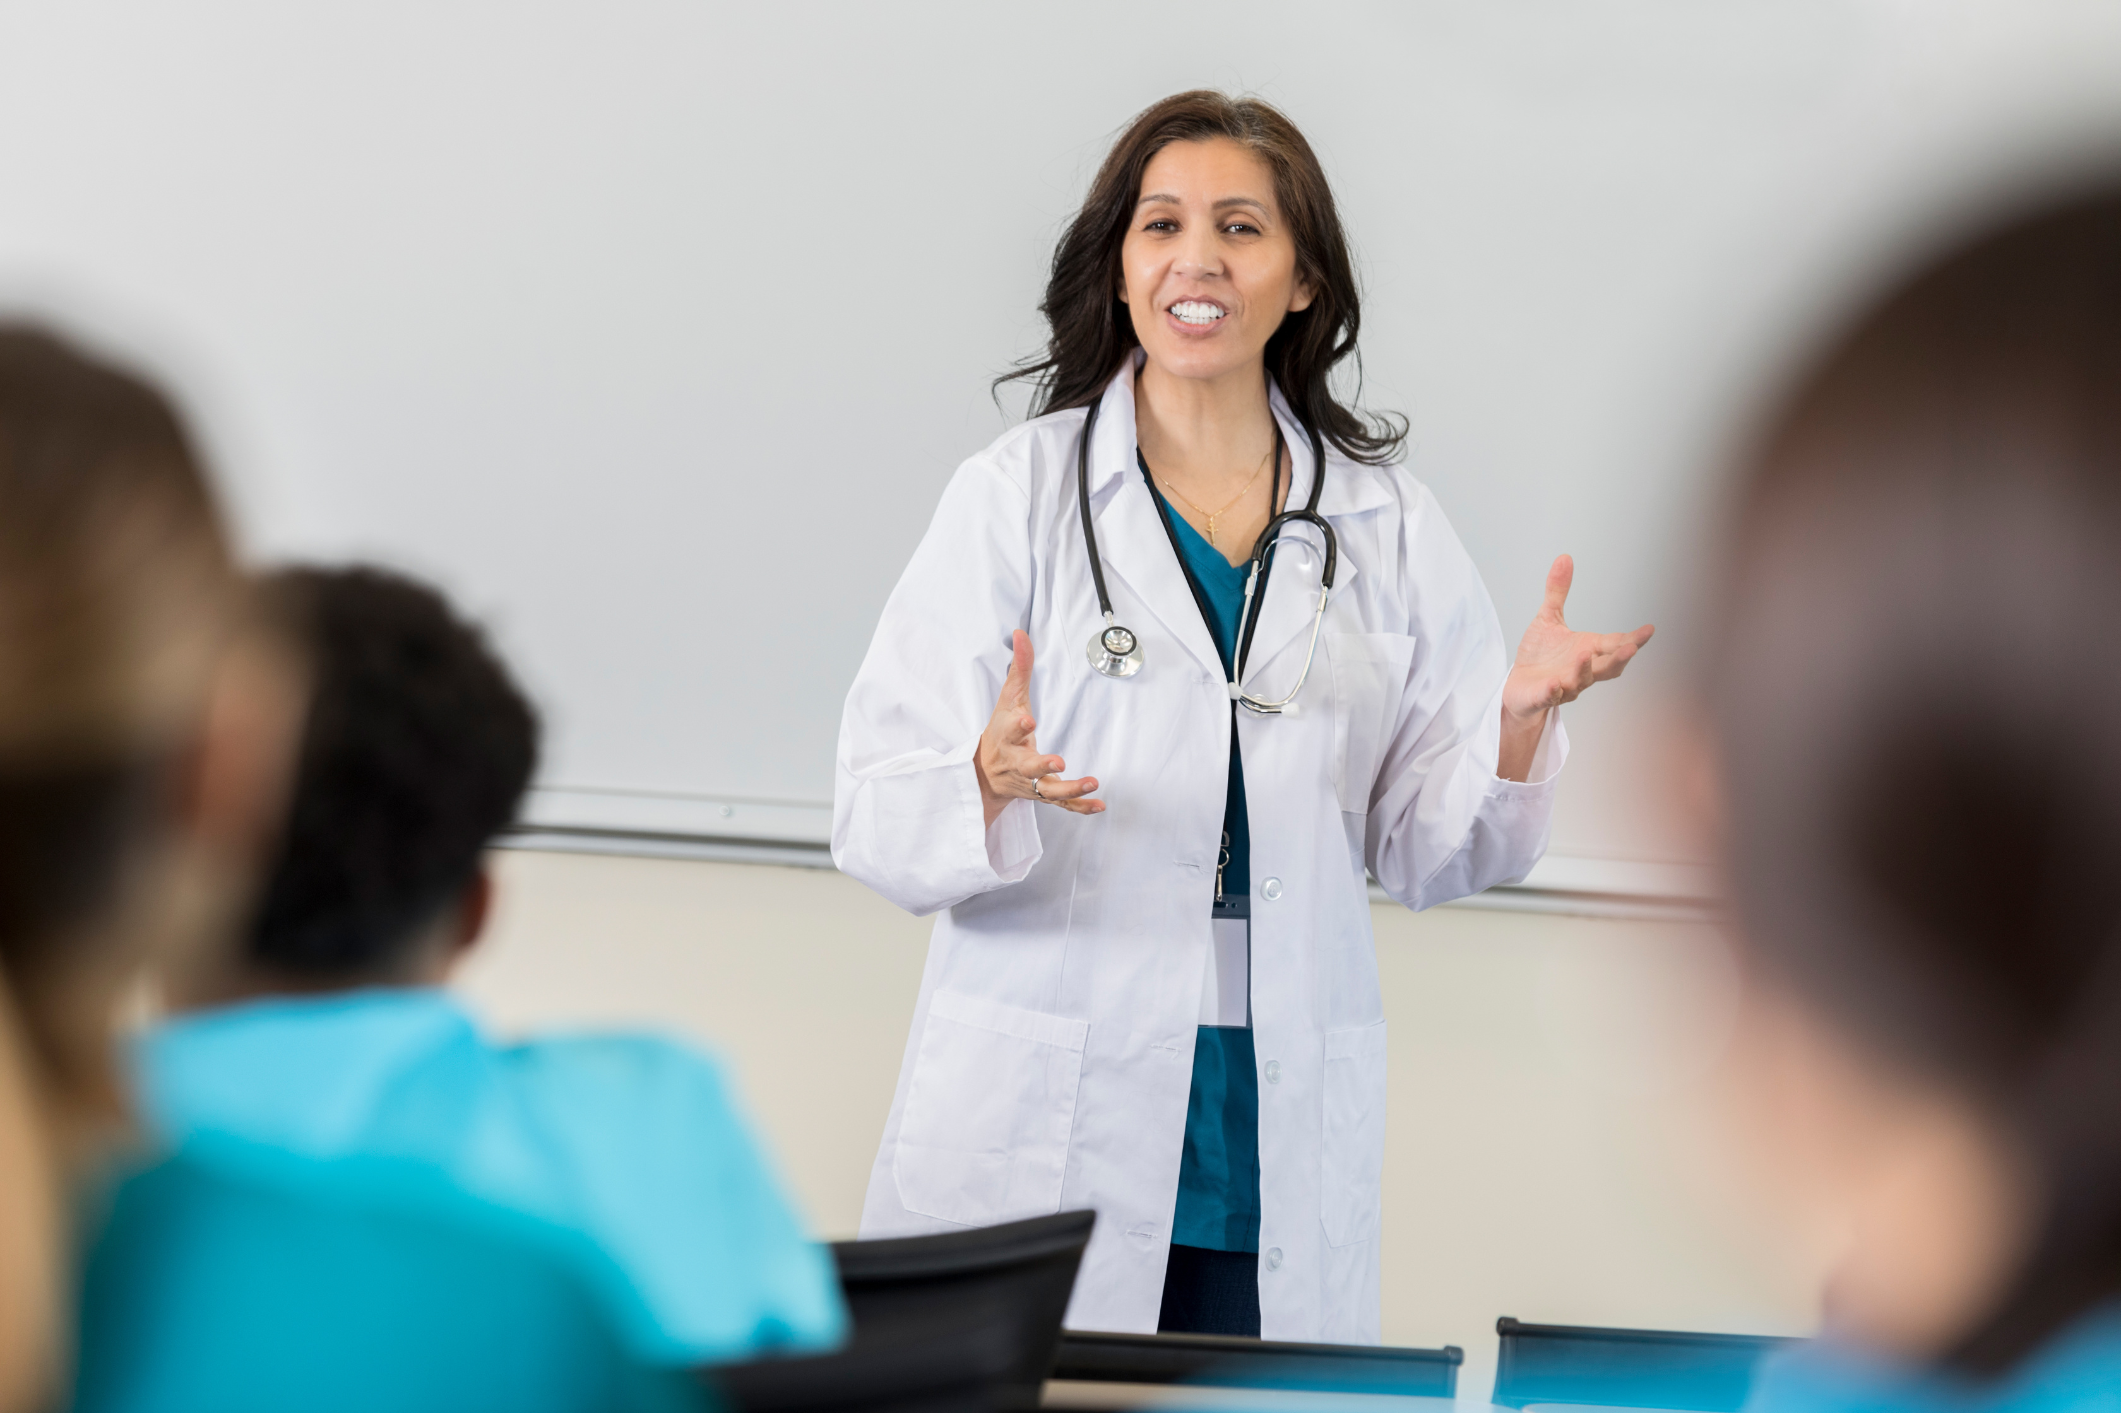 5 Ways to Get Buy-In for EHR Software at Your School